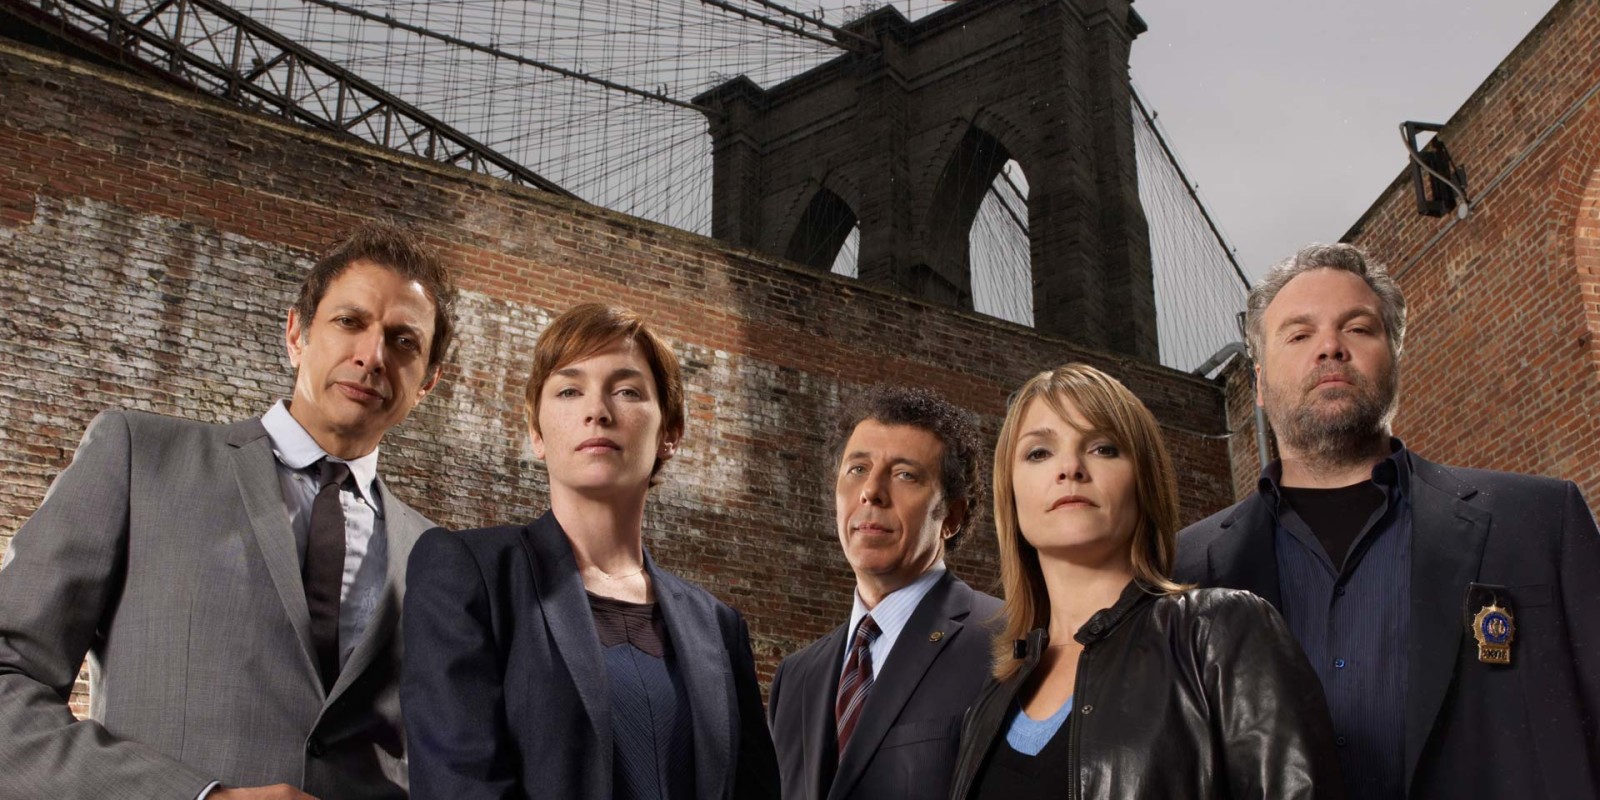 High Resolution Wallpaper | Law & Order: Criminal Intent 1600x800 px